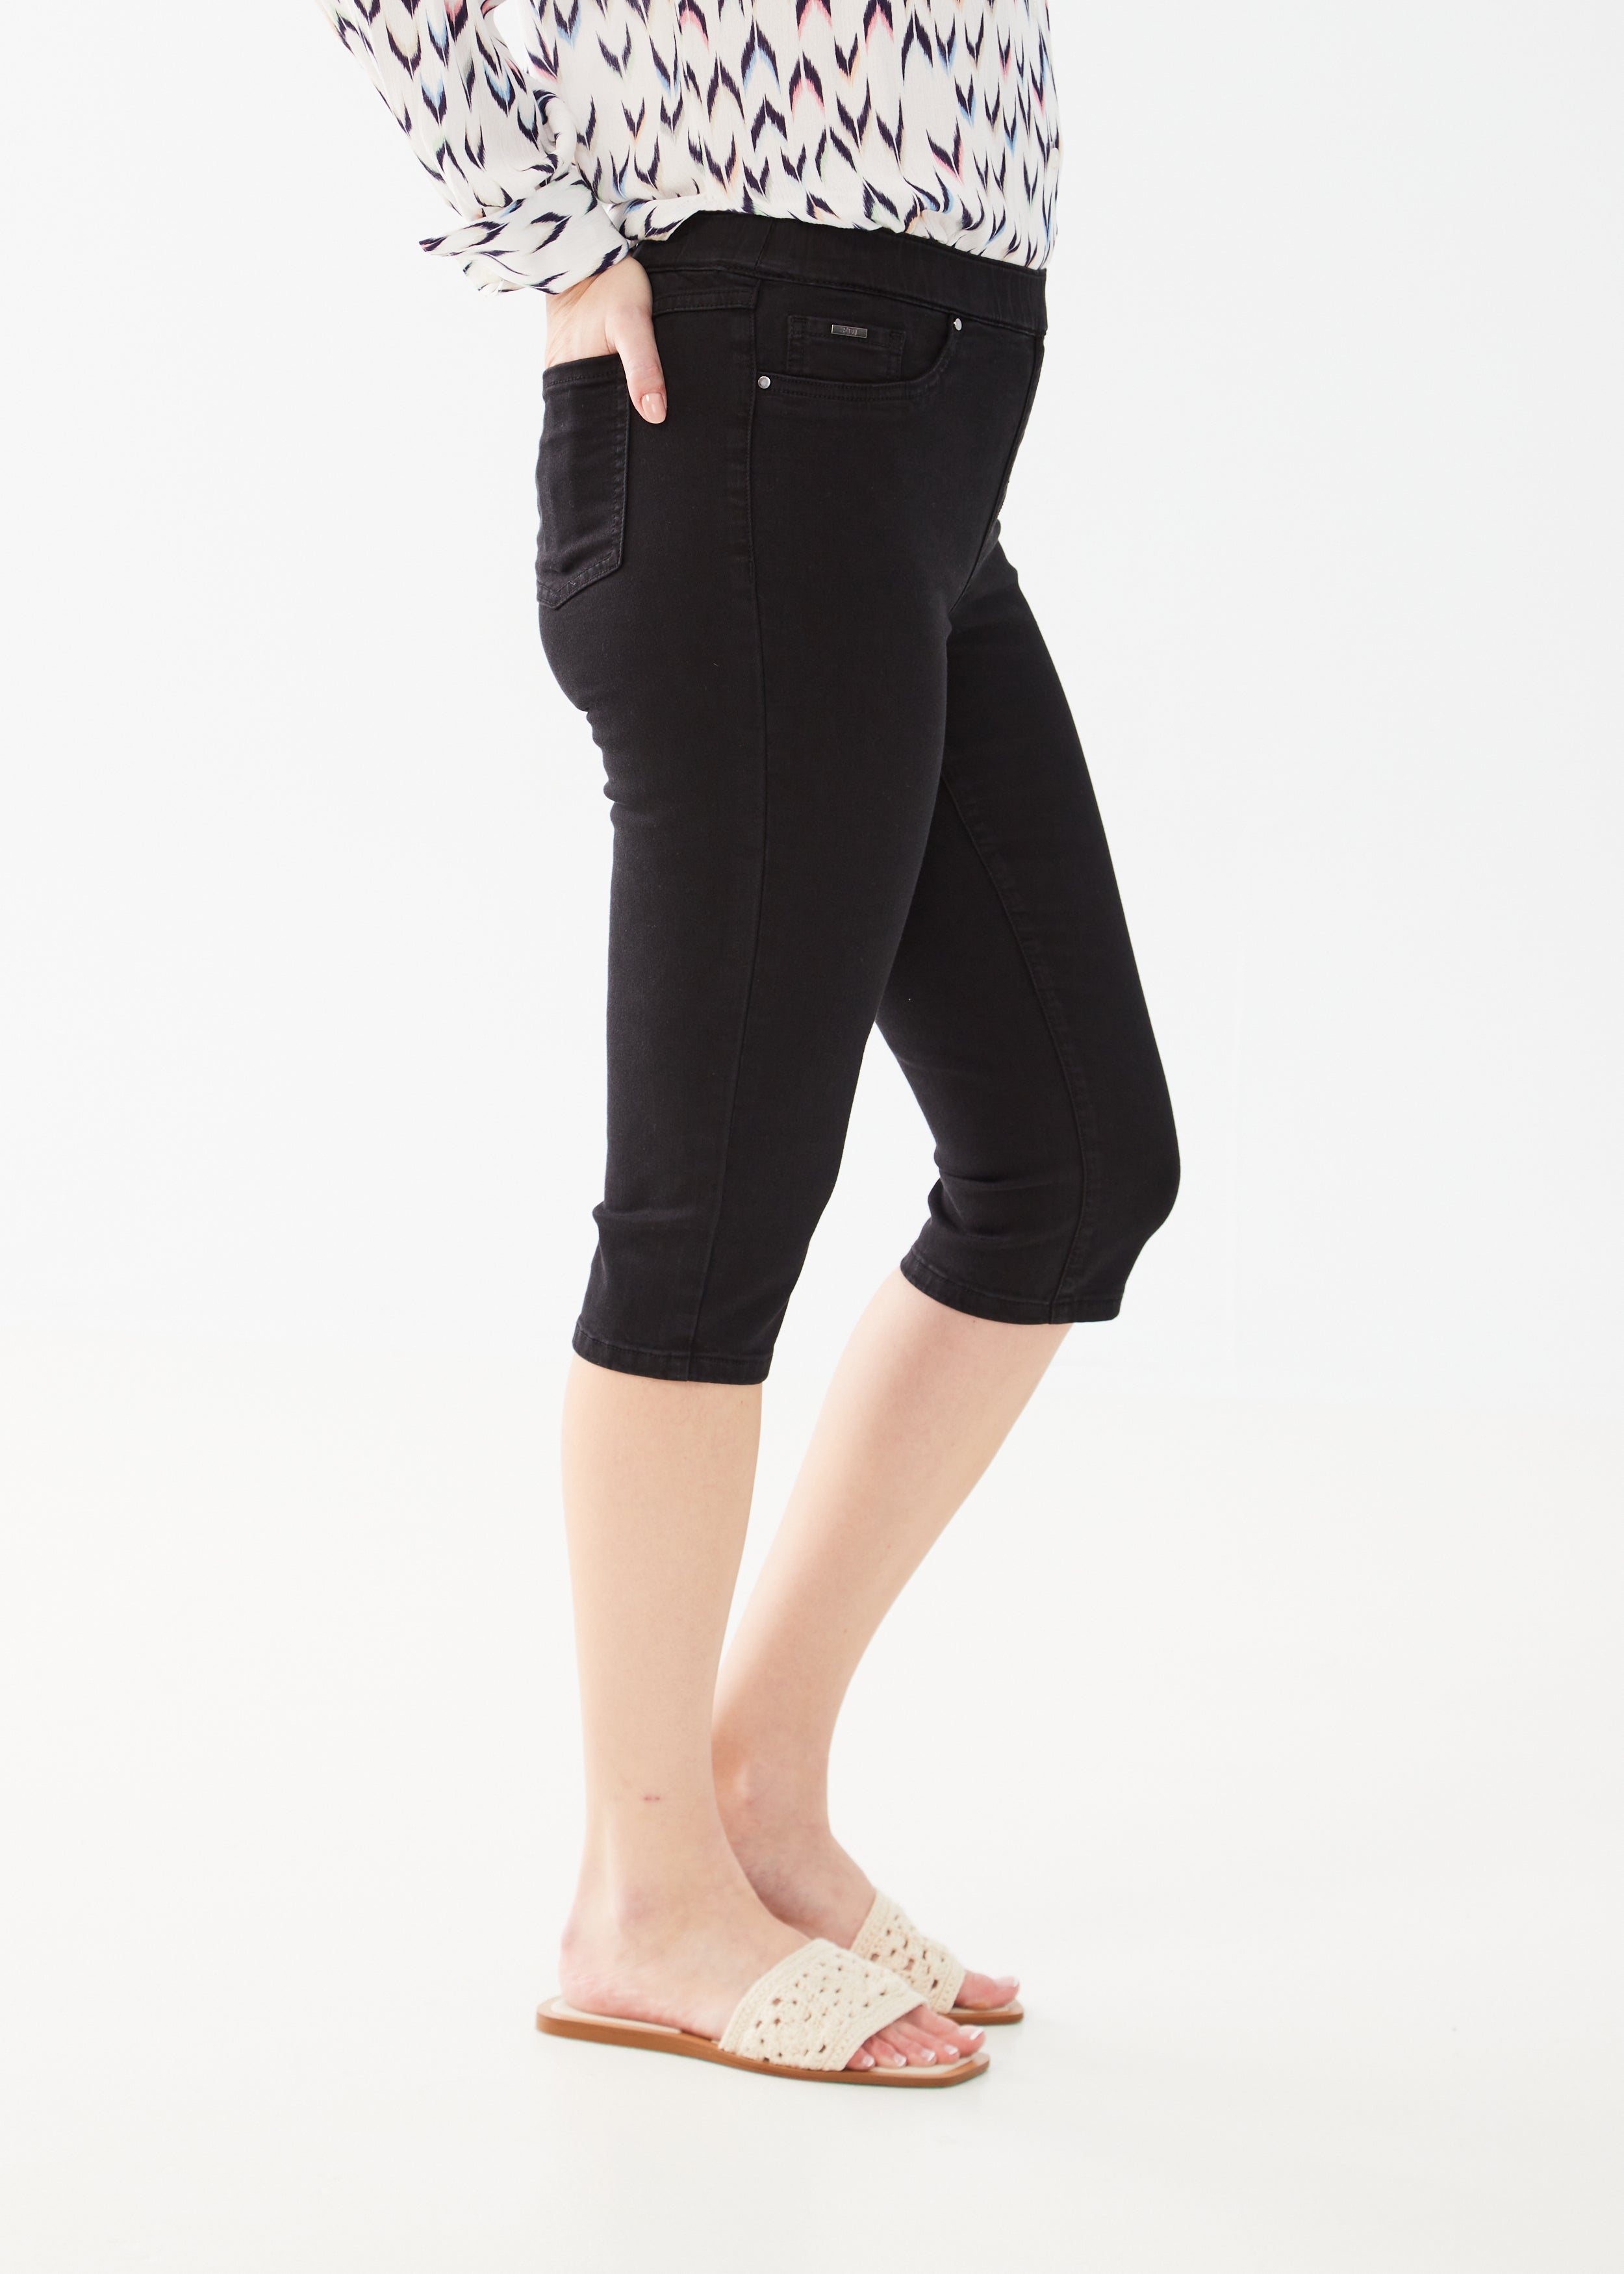 Achieve both style and functionality with our FDJ Pull-On Pedal Pusher. With a clean front and functional back pockets, these pants provide convenience and a sleek look. The stretch fabric ensures a comfortable fit for all-day wear.